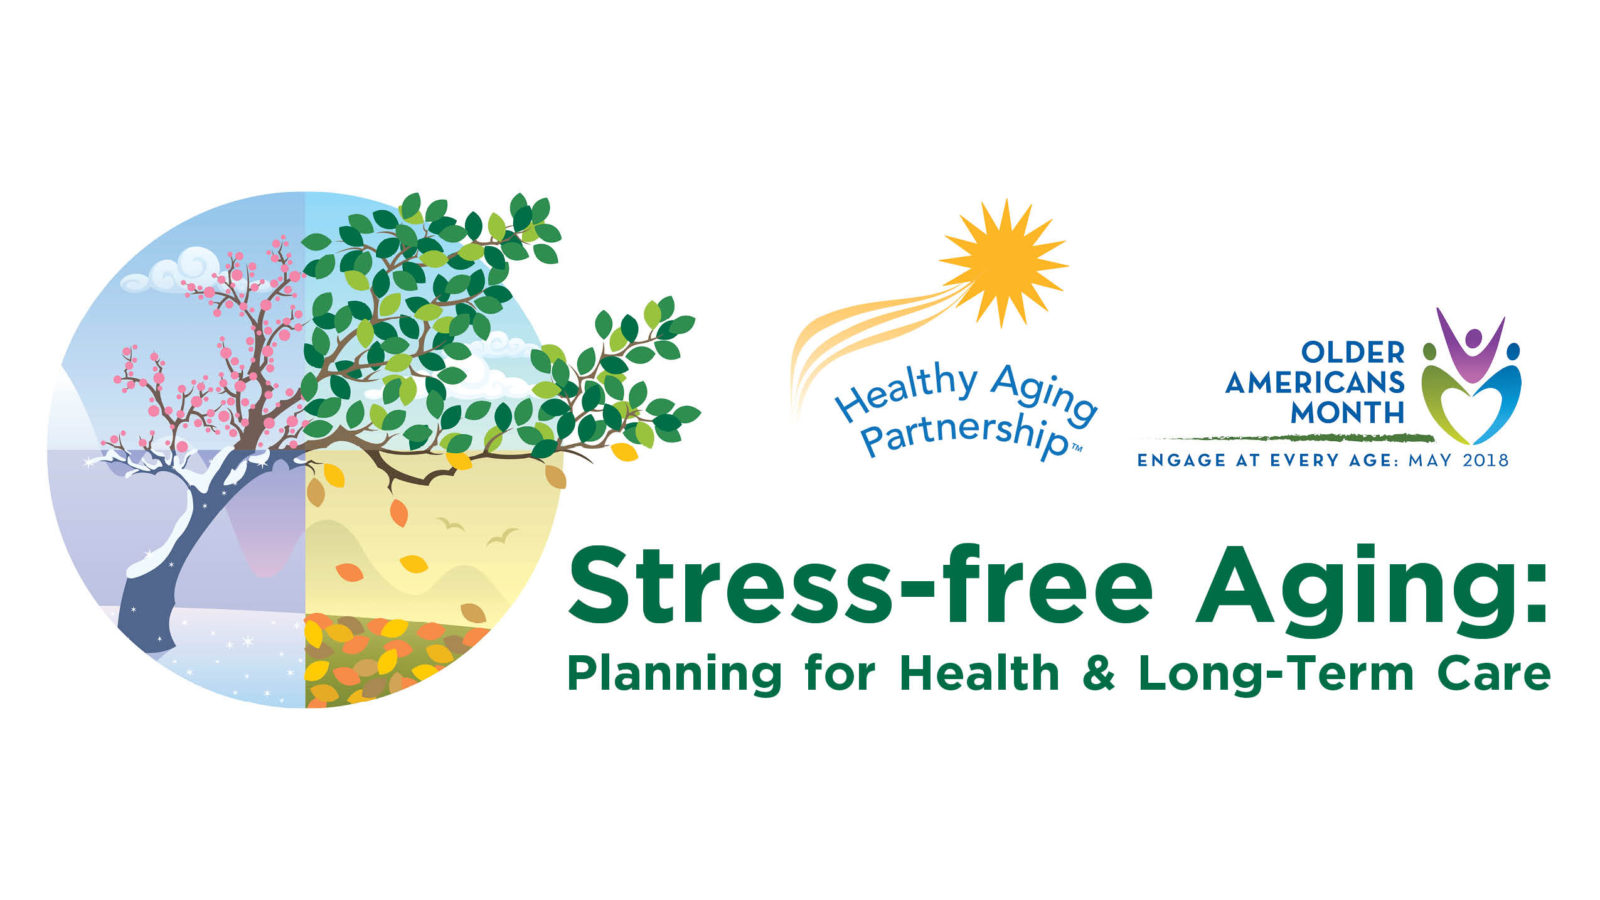 Banner for Stress-free Aging event on May 23, 2018 at the Renton Community Center.